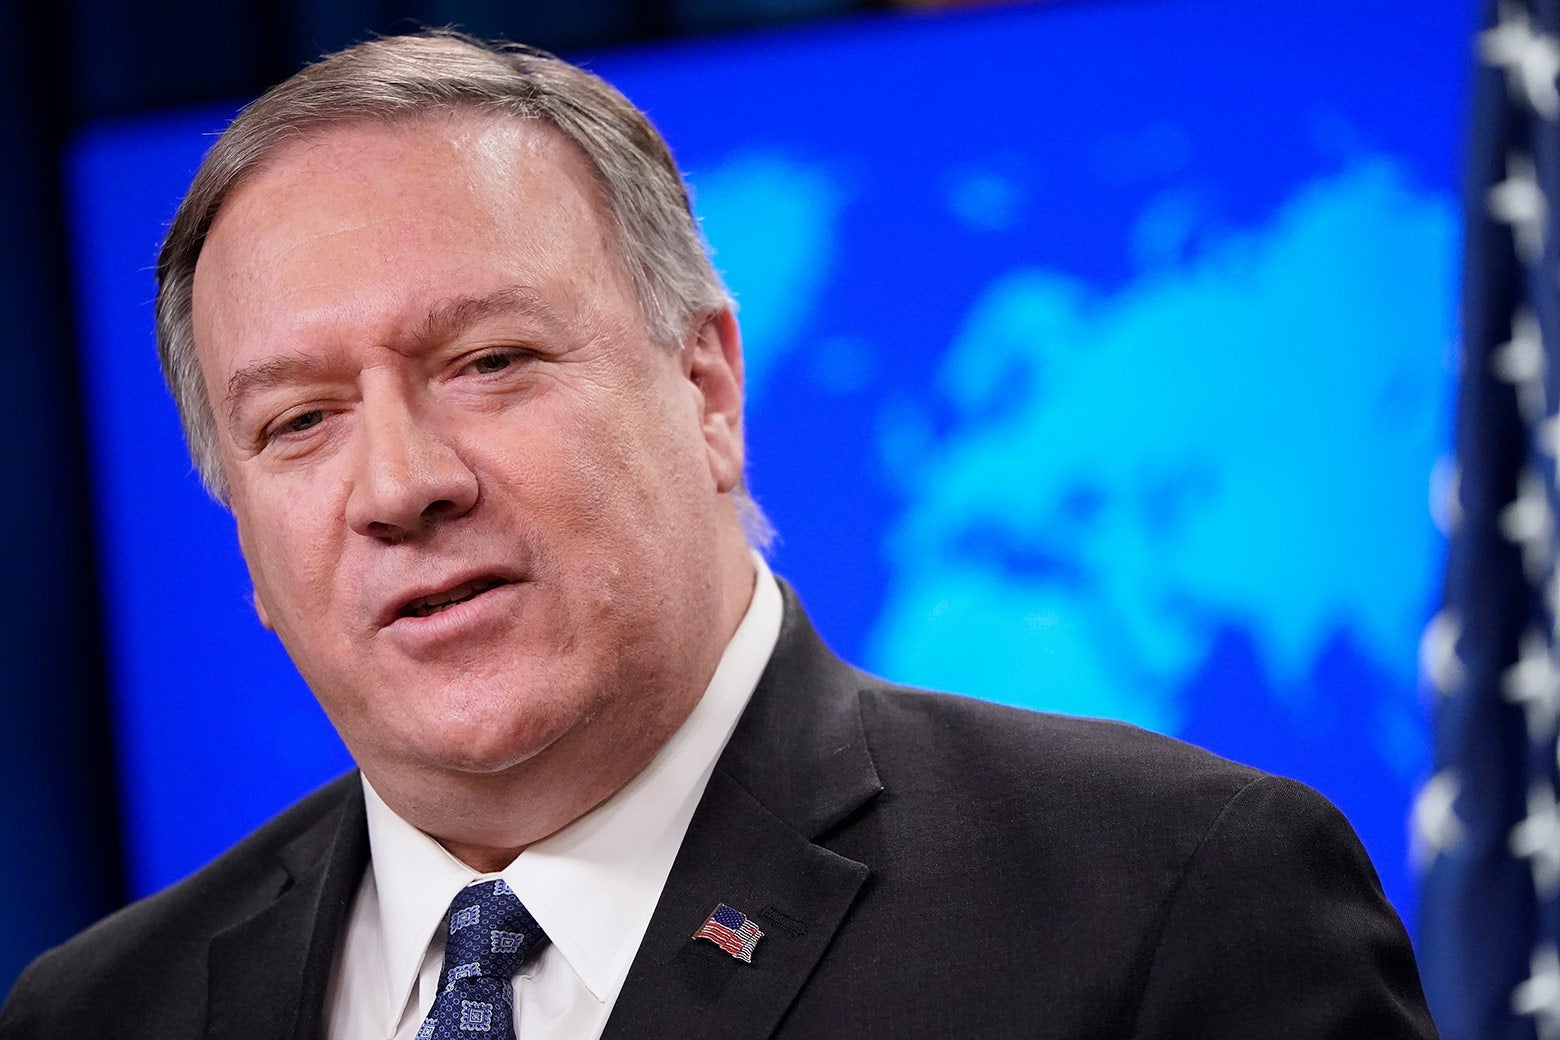 Pompeo tilts his head while speaking. He is wearing a visible American flag pin on his lapel.